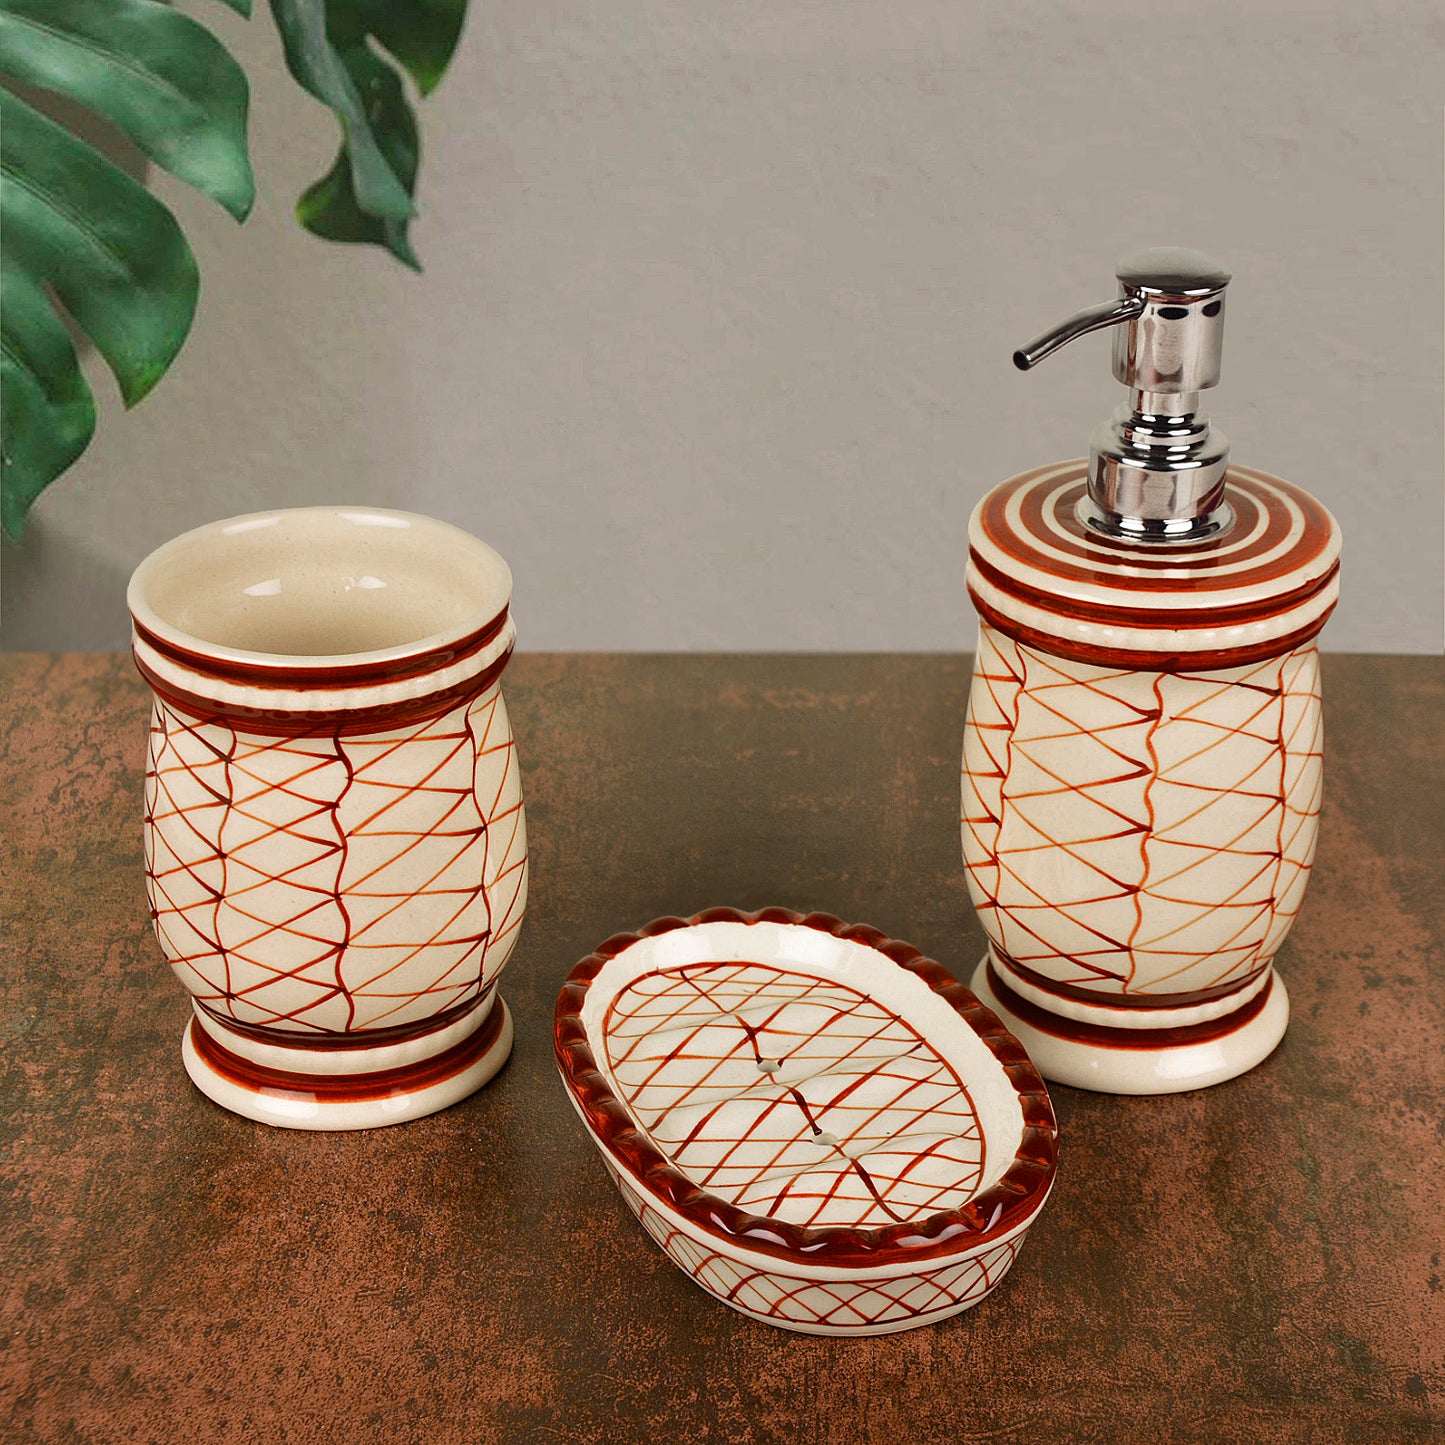 Handpainted Ceramic Bathroom Set (Off White and Brown,1 Liquid Soap Dispenser, 1 Soap Tray, 1 Toothbrush Holder)